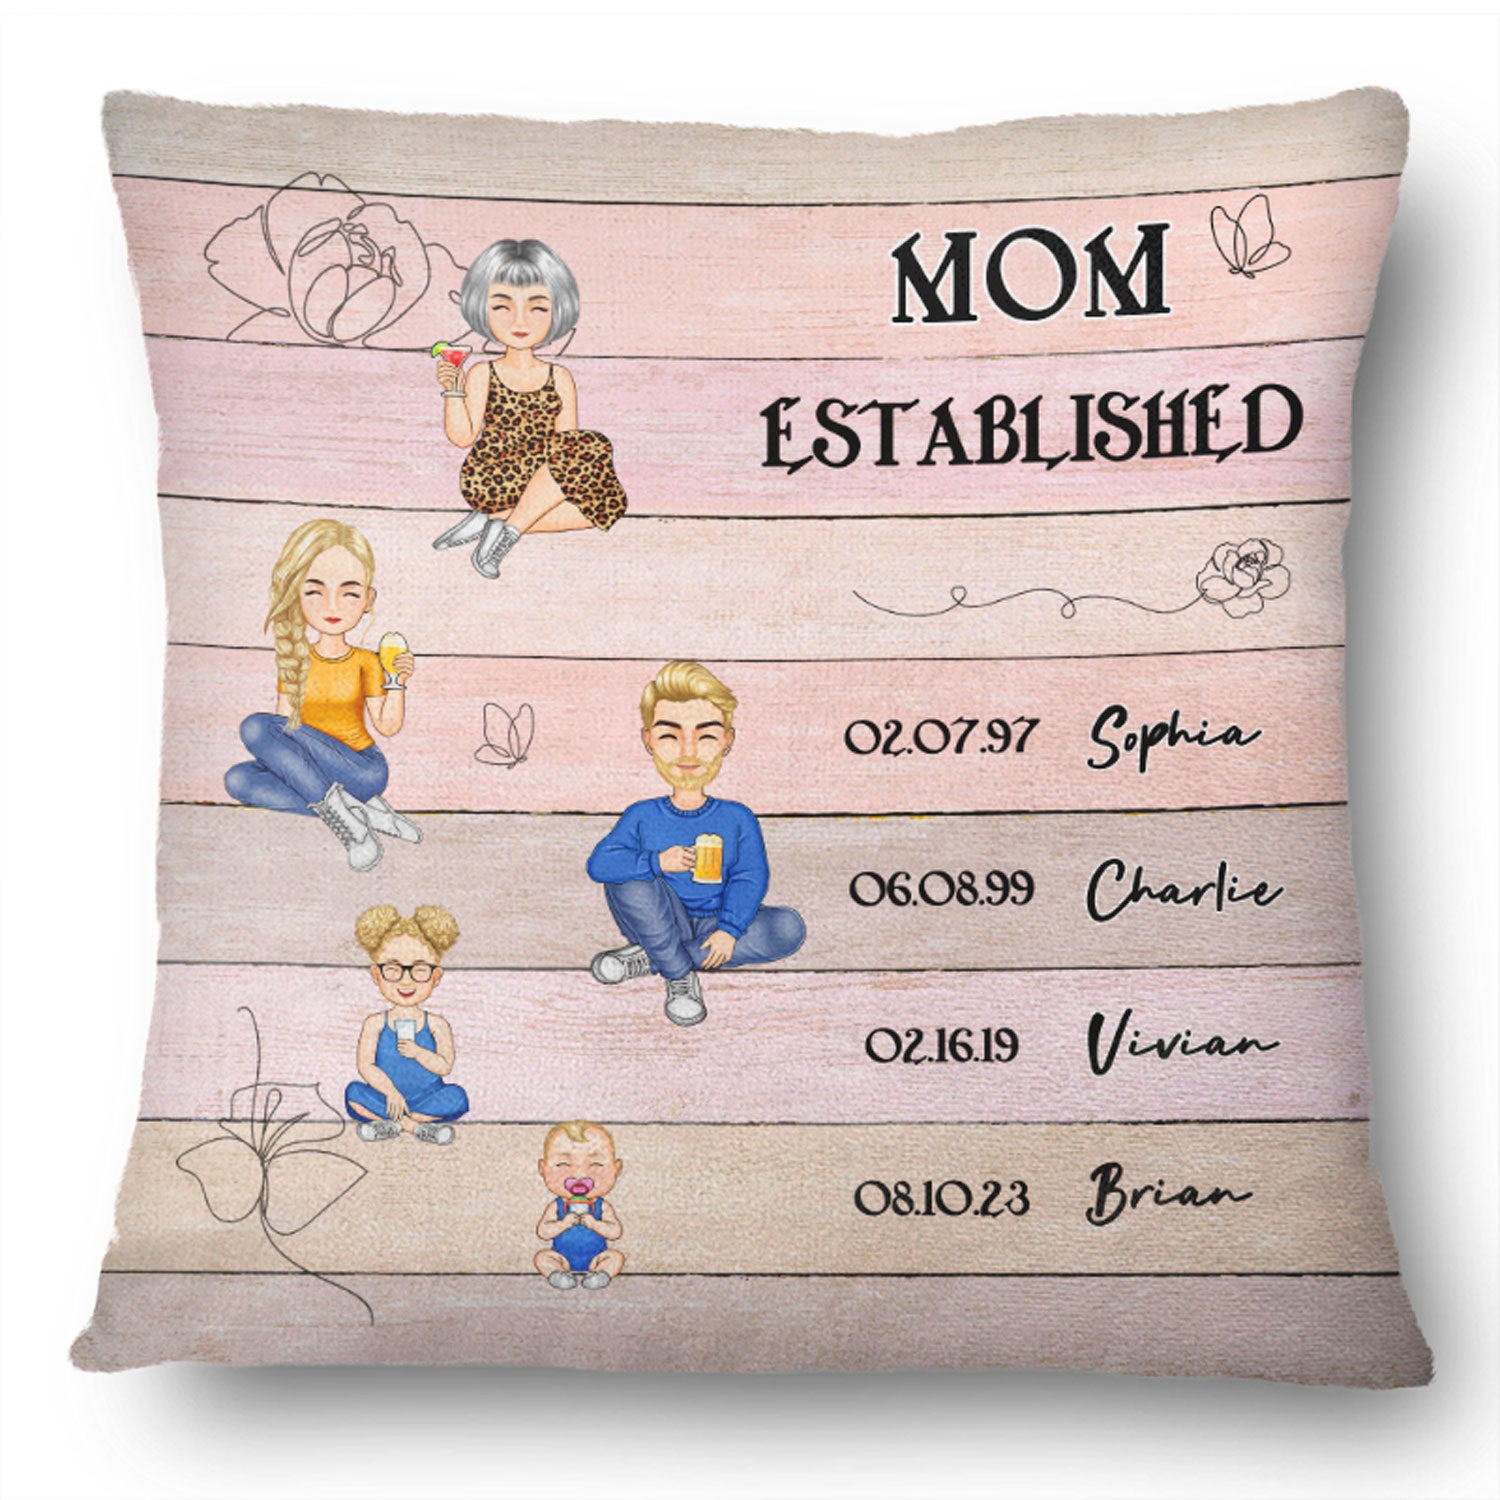 Mom Established - Gift For Mom - Personalized Pillow